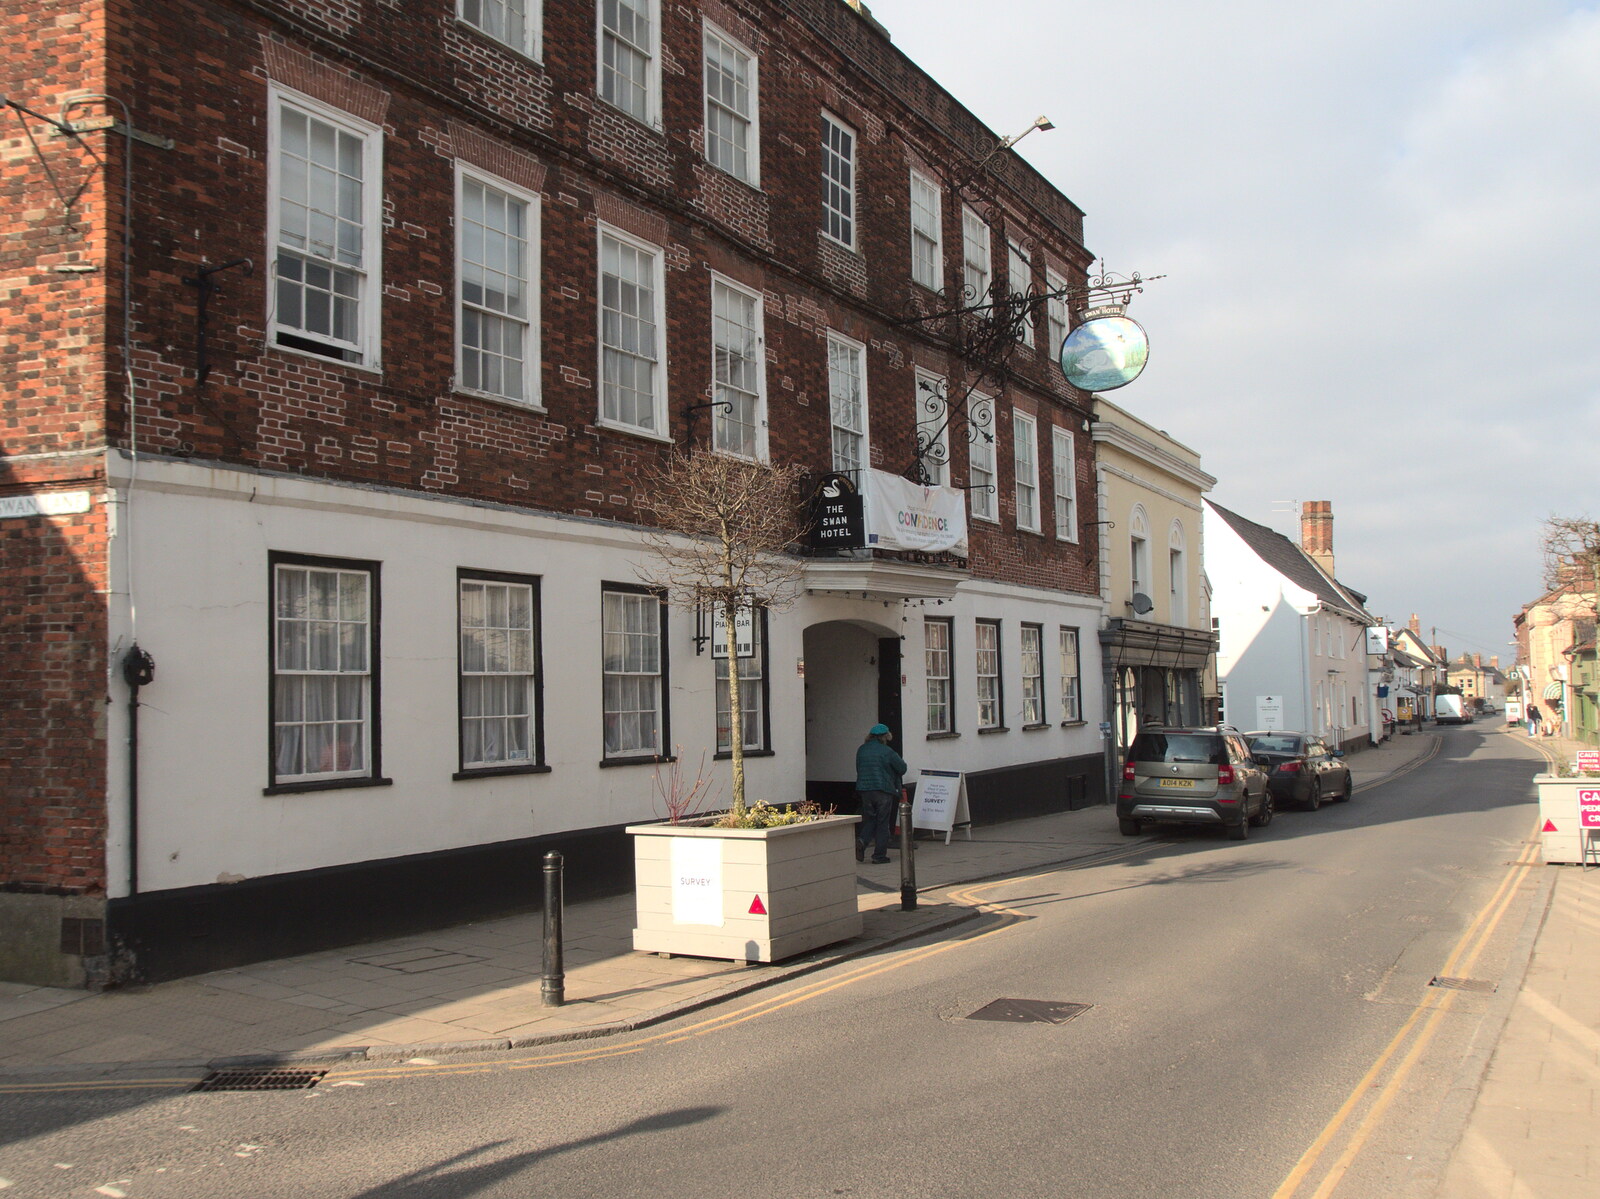 The Swan Hotel, scene of many Printec gatherings from A Vaccine Postcard from Harleston, Norfolk - 22nd March 2021